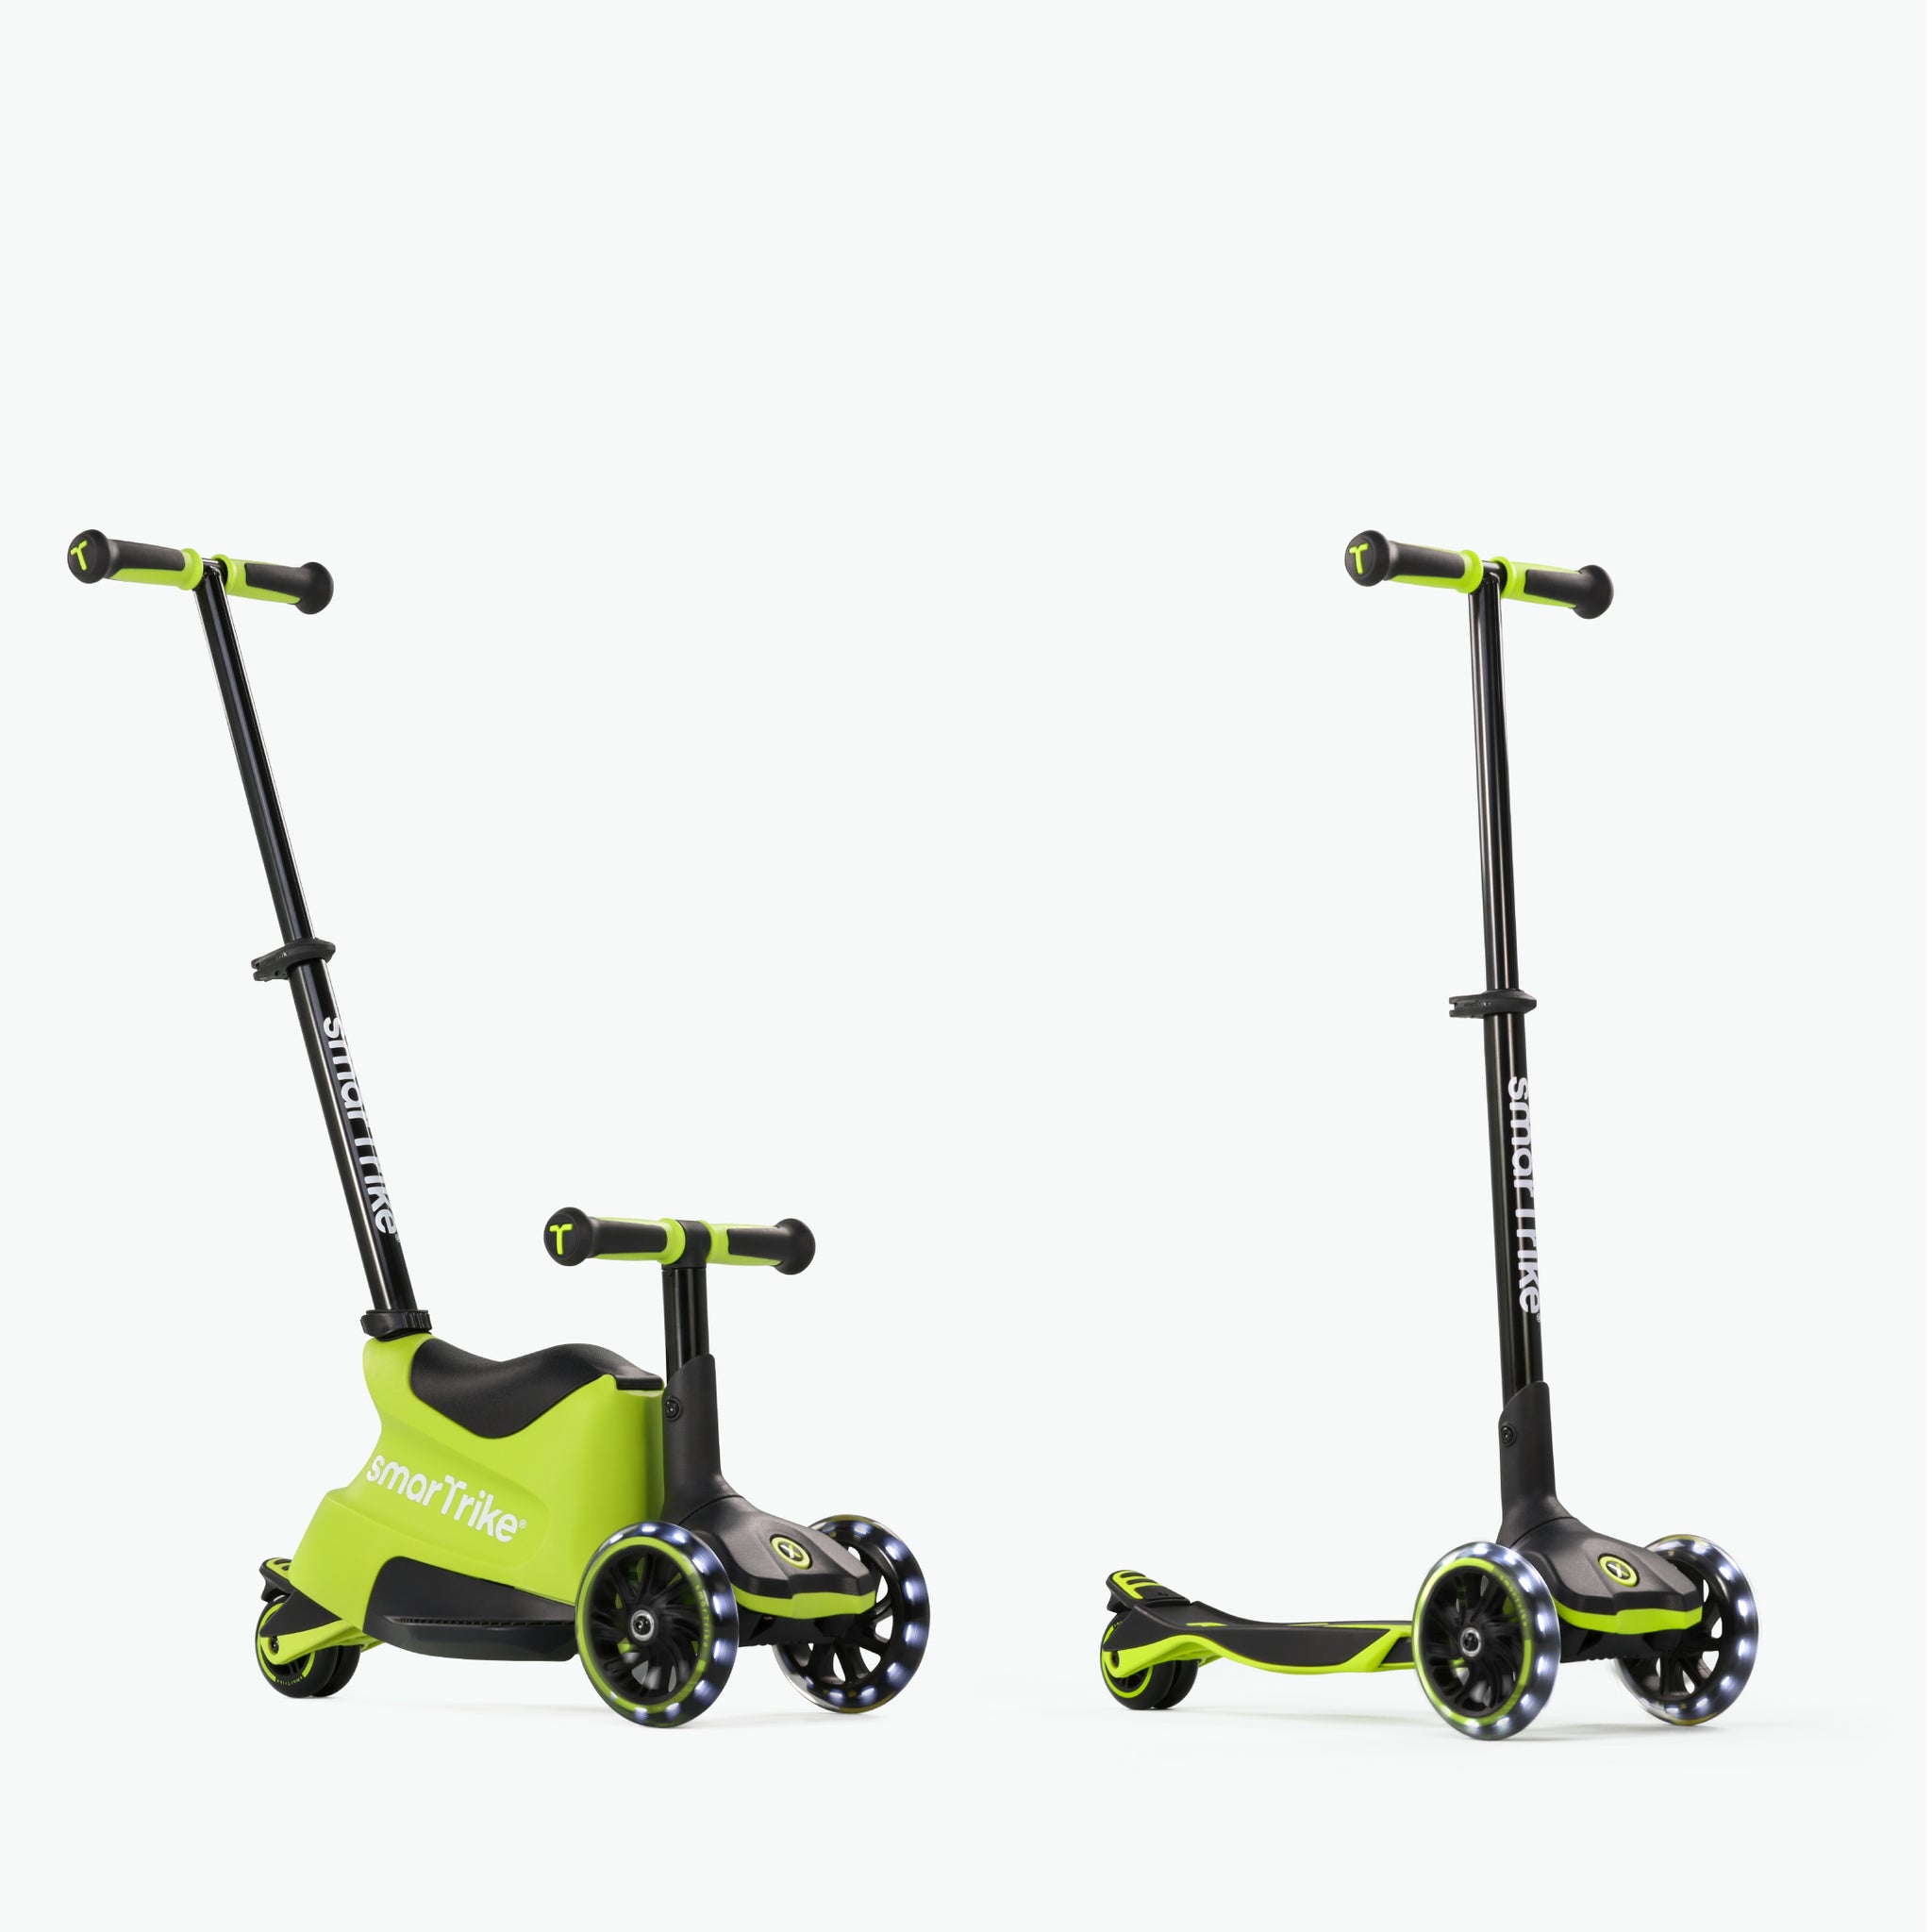 SmartRike - 4in1 scooter - Xtend Ride -on - Lime